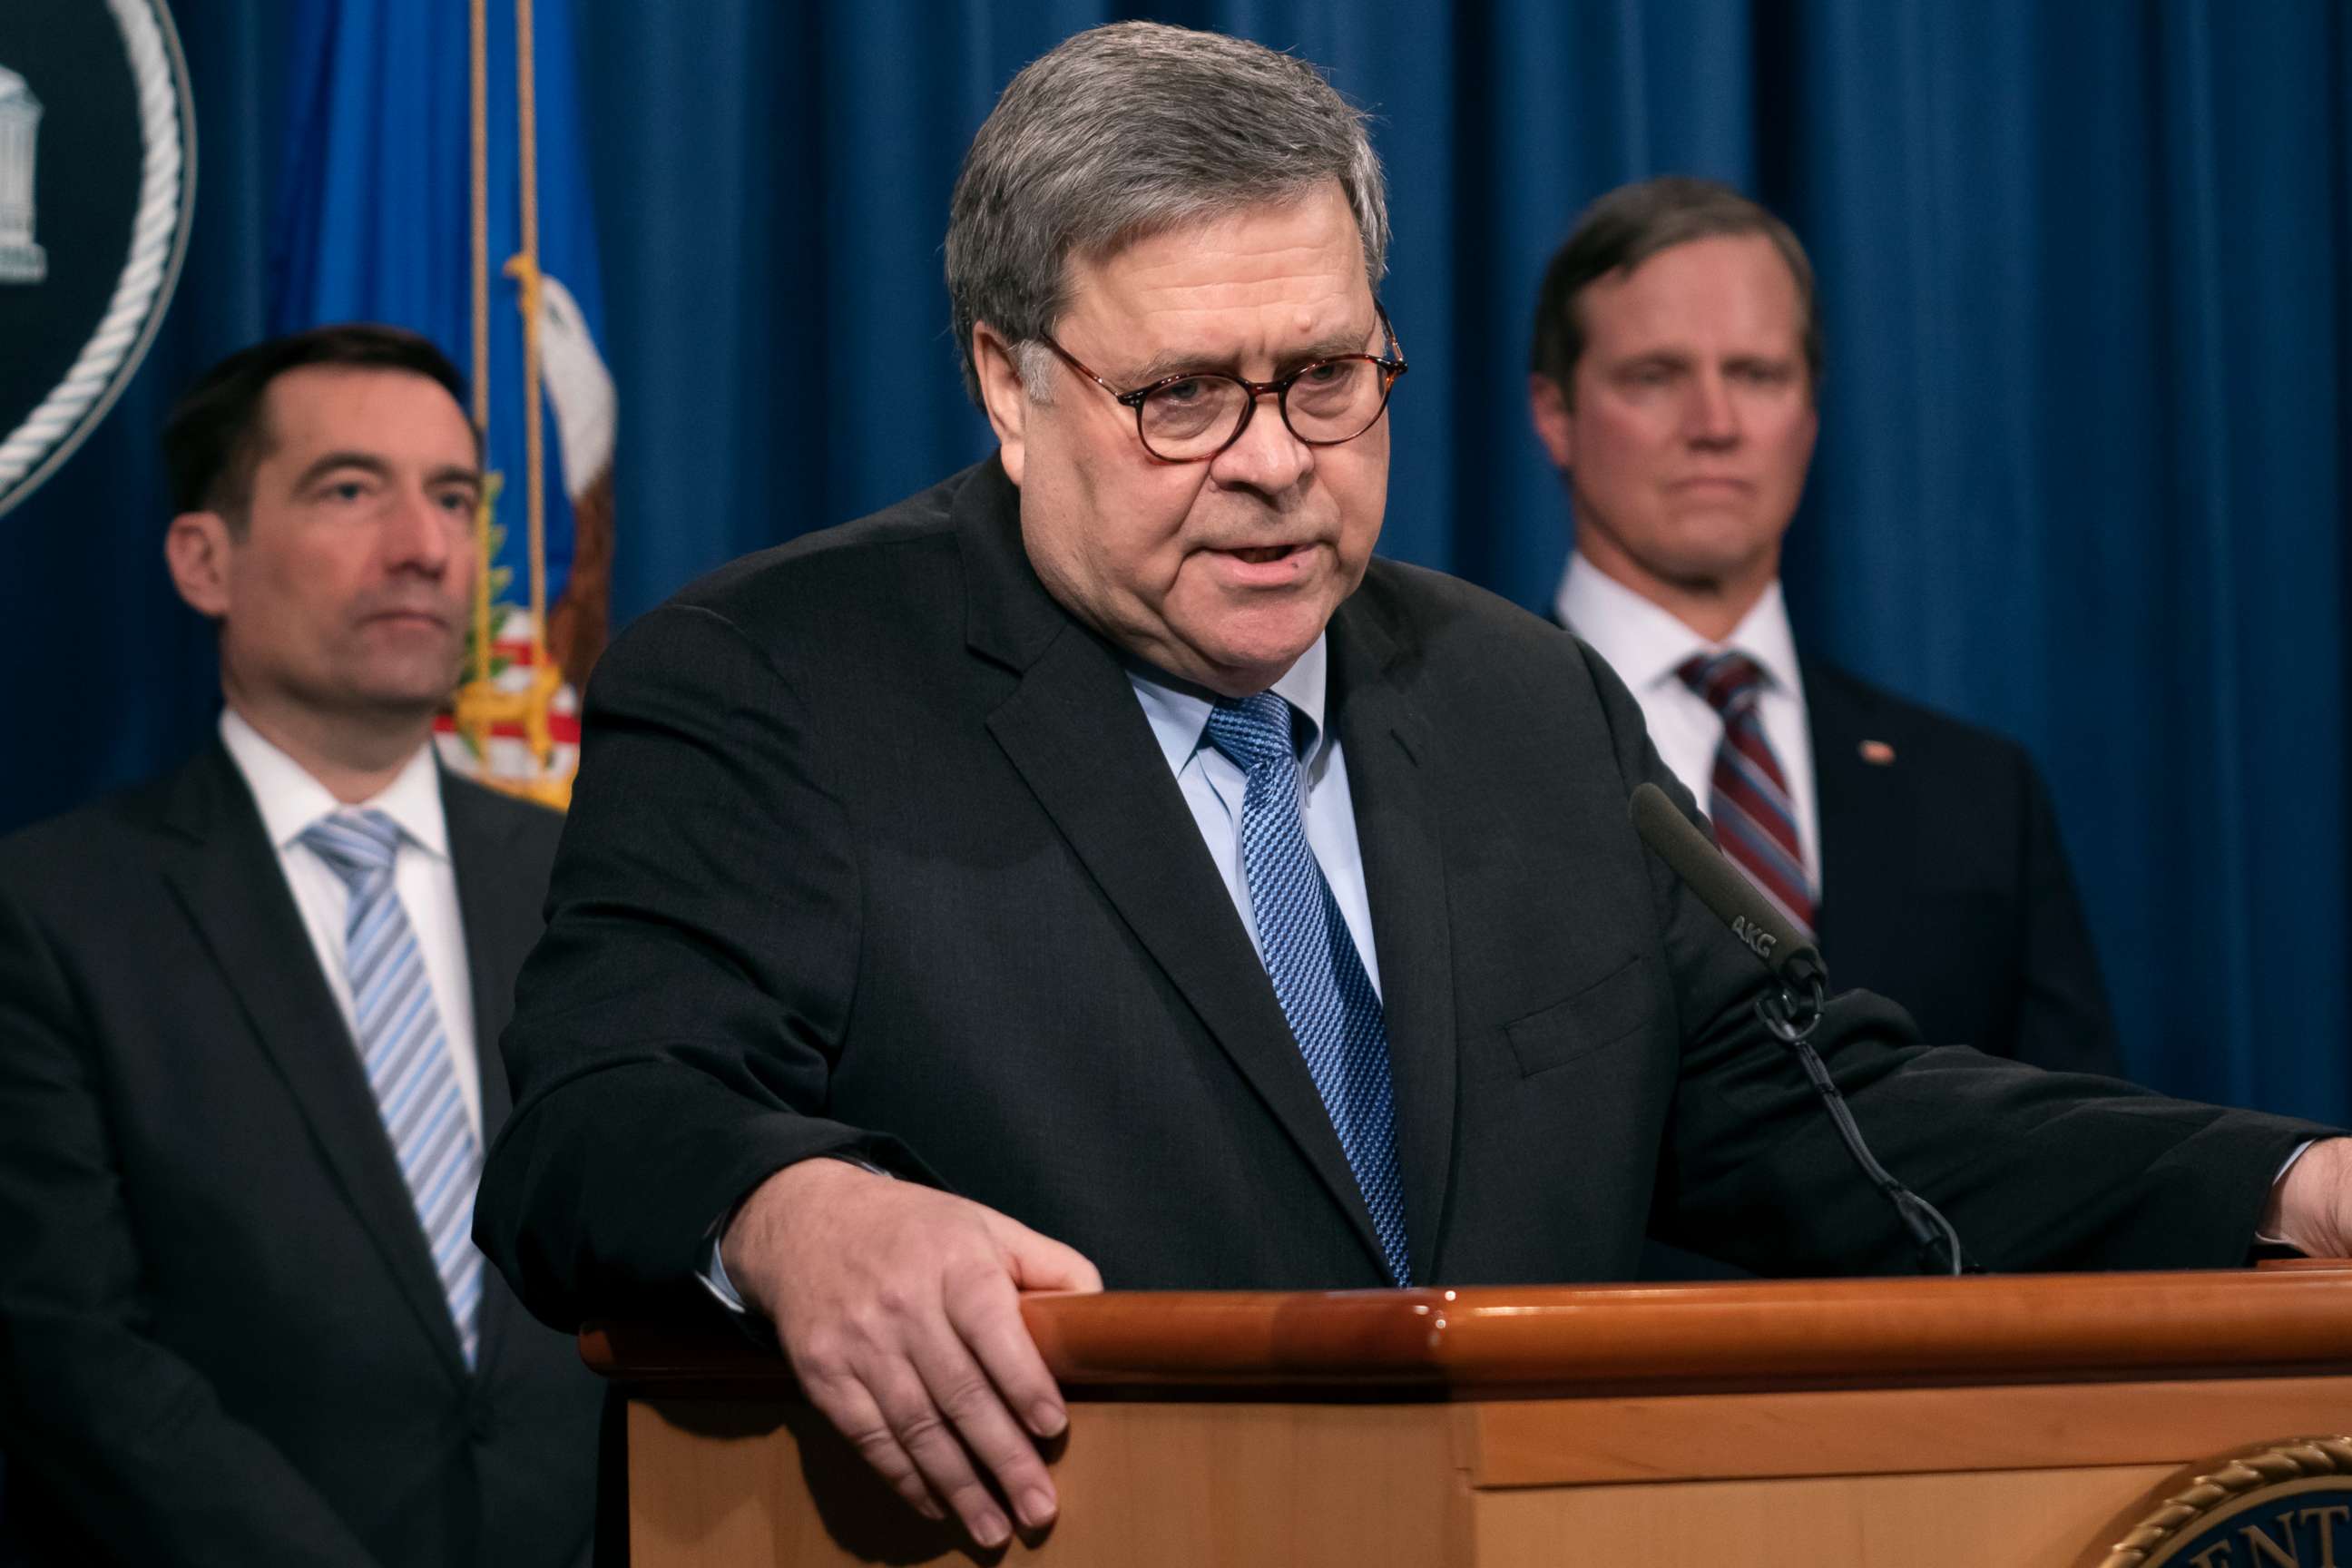 PHOTO: Attorney General William Barr speaks to reporters at the Justice Department in Washington, Jan. 13, 2020, to announce results of an investigation of the shootings at the Pensacola Naval Air Station in Florida.